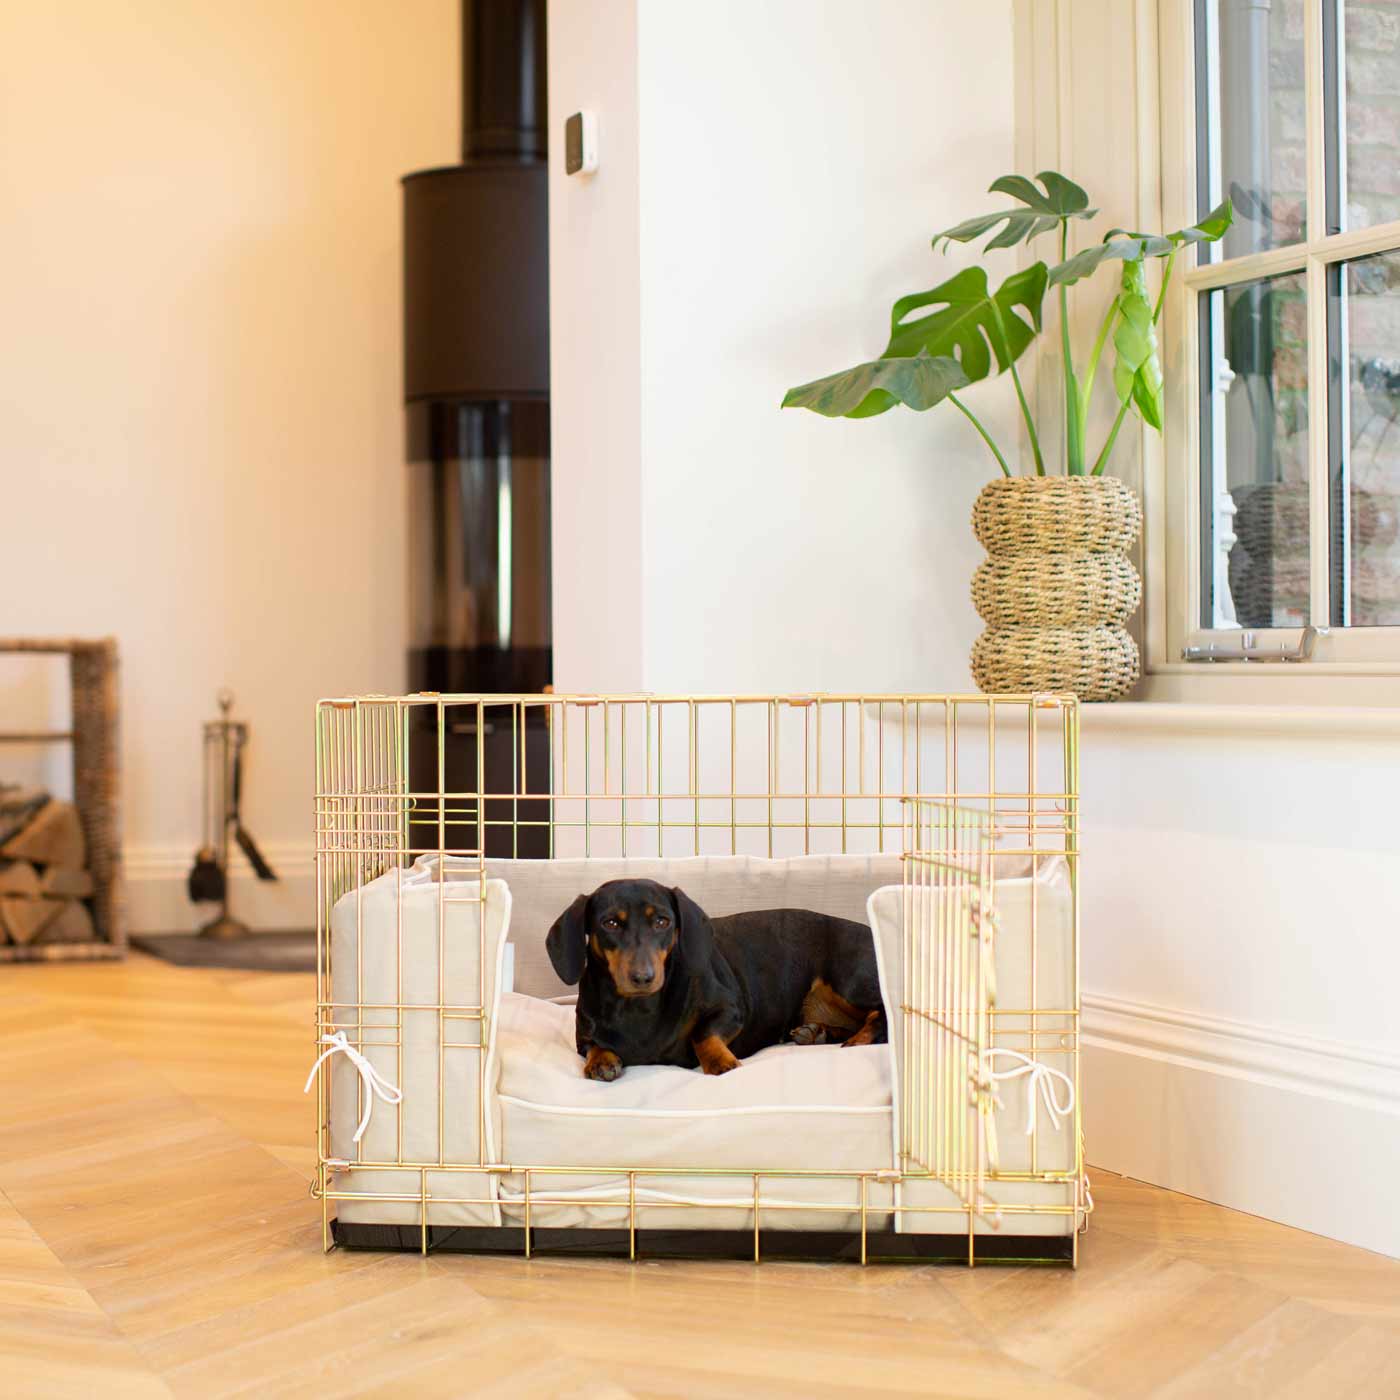 [color:savanna oatmeal] Accessorize your dog cage with our stunning bumper covers, choose from our Savanna collection! Made using luxury fabric for the perfect cage accessory to build the ultimate dog den! Available now in 3 colors and sizes at Lords & Labradors US